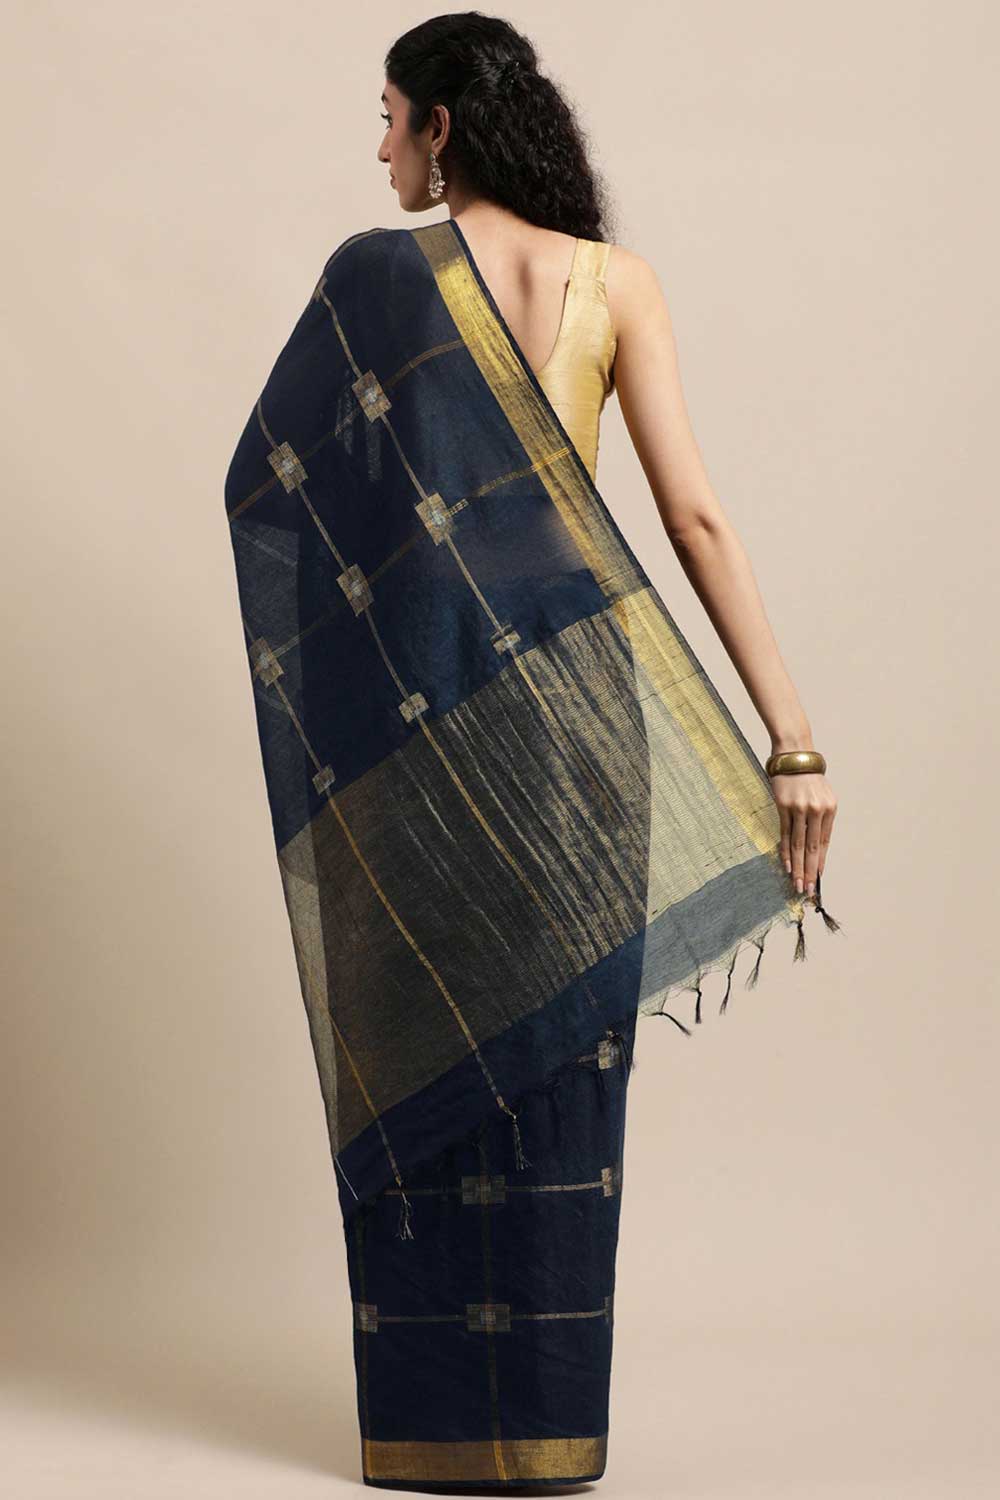 Shop Trupti Navy Blue Zari Woven Blended Silk One Minute Saree at best offer at our  Store - One Minute Saree